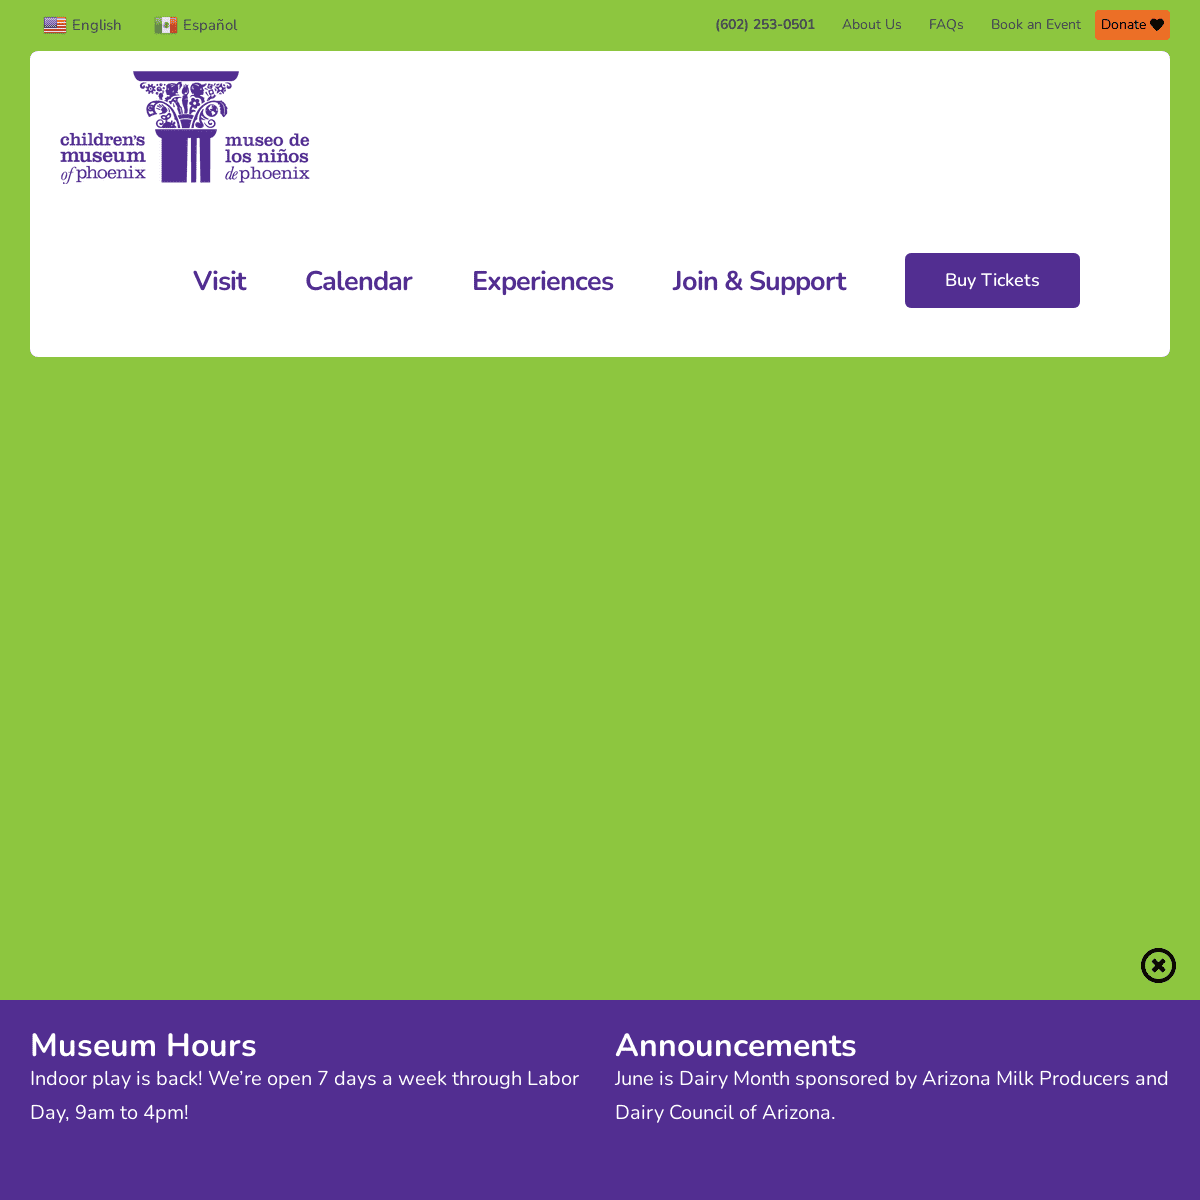 A complete backup of https://childrensmuseumofphoenix.org